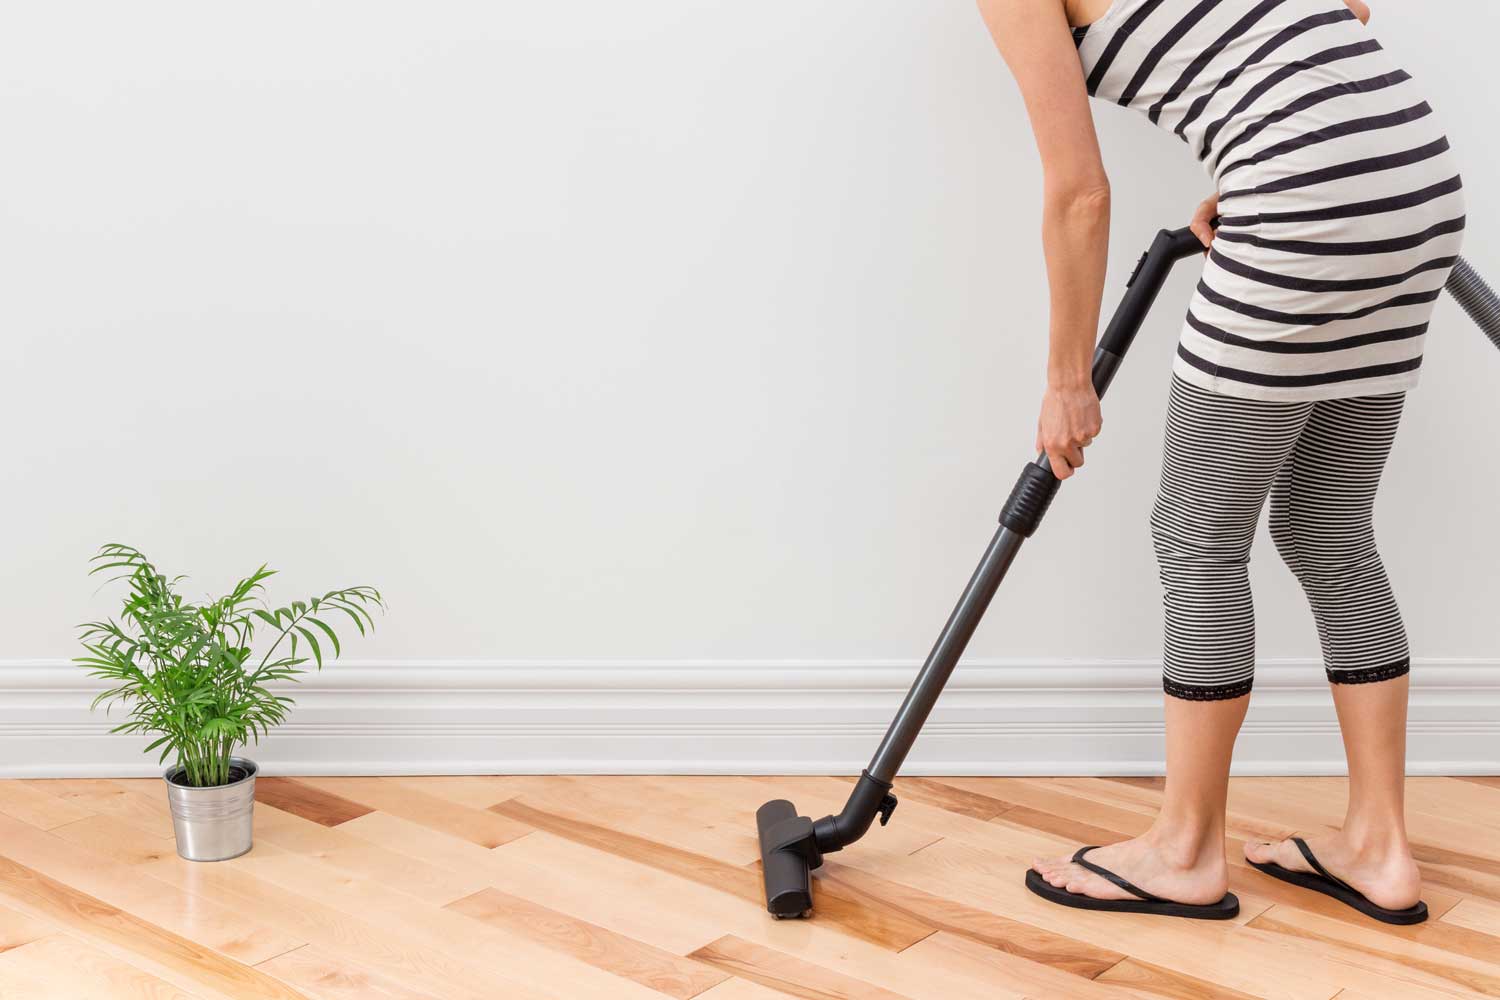 Regulary vacuum or sweep floors to remove dirt and keep your home floors looking amazing - tips from Footprints Floors in The Woodlands / Conroe.